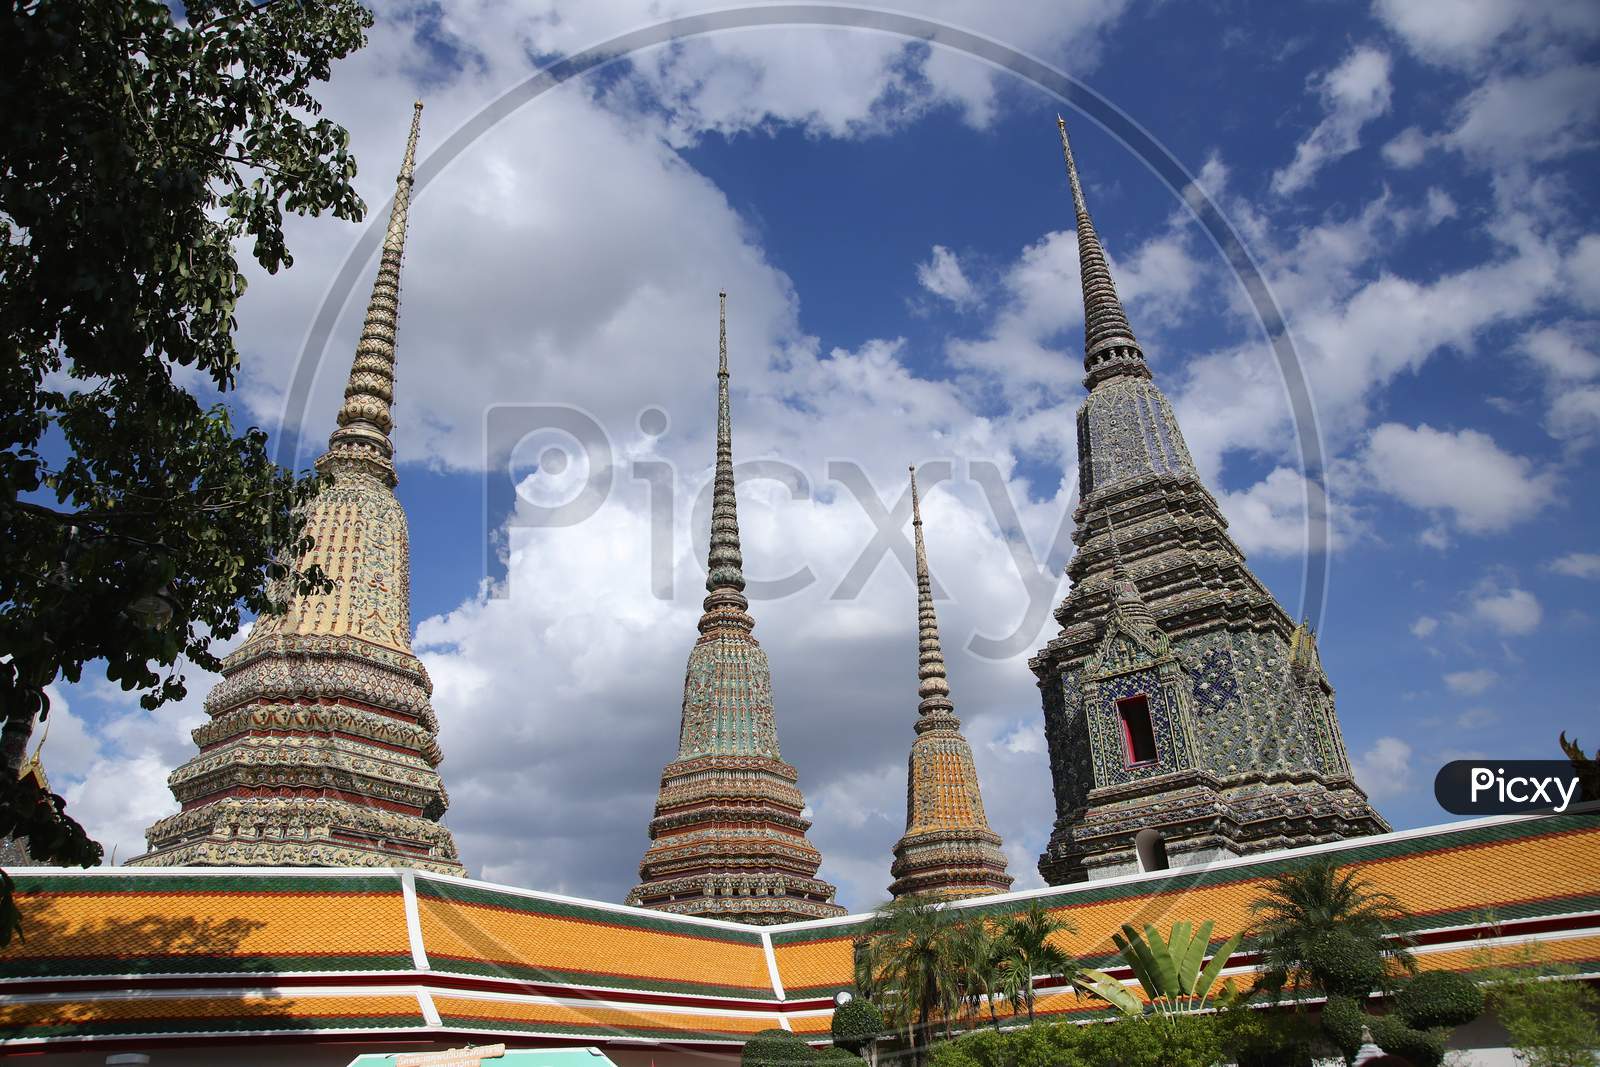 Historical And Buddha Religious Temple Architecture Of Thailand